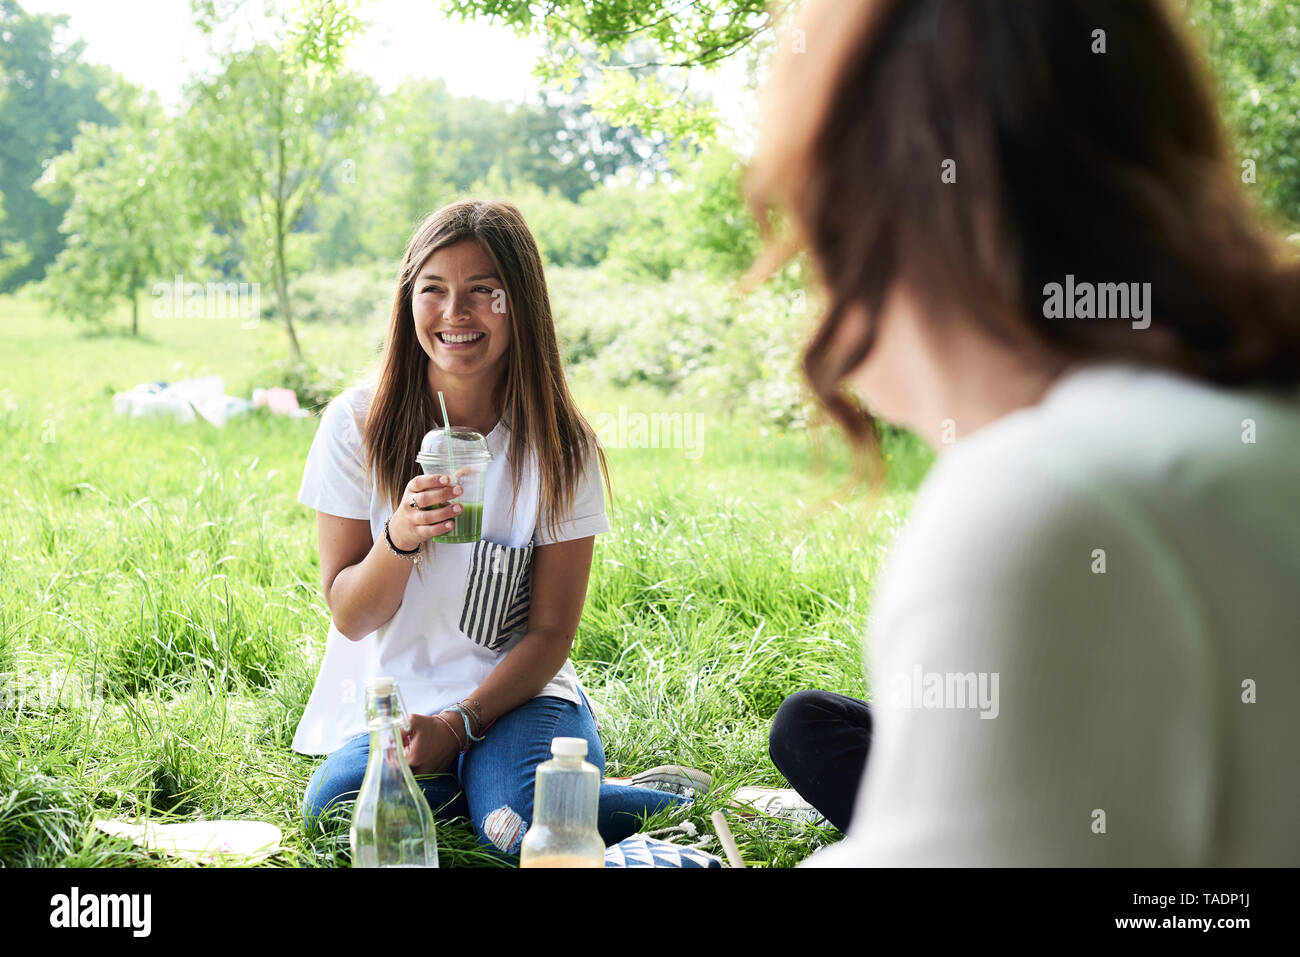 Happy young woman drinking juice with friends at a picnic in park Stock Photo